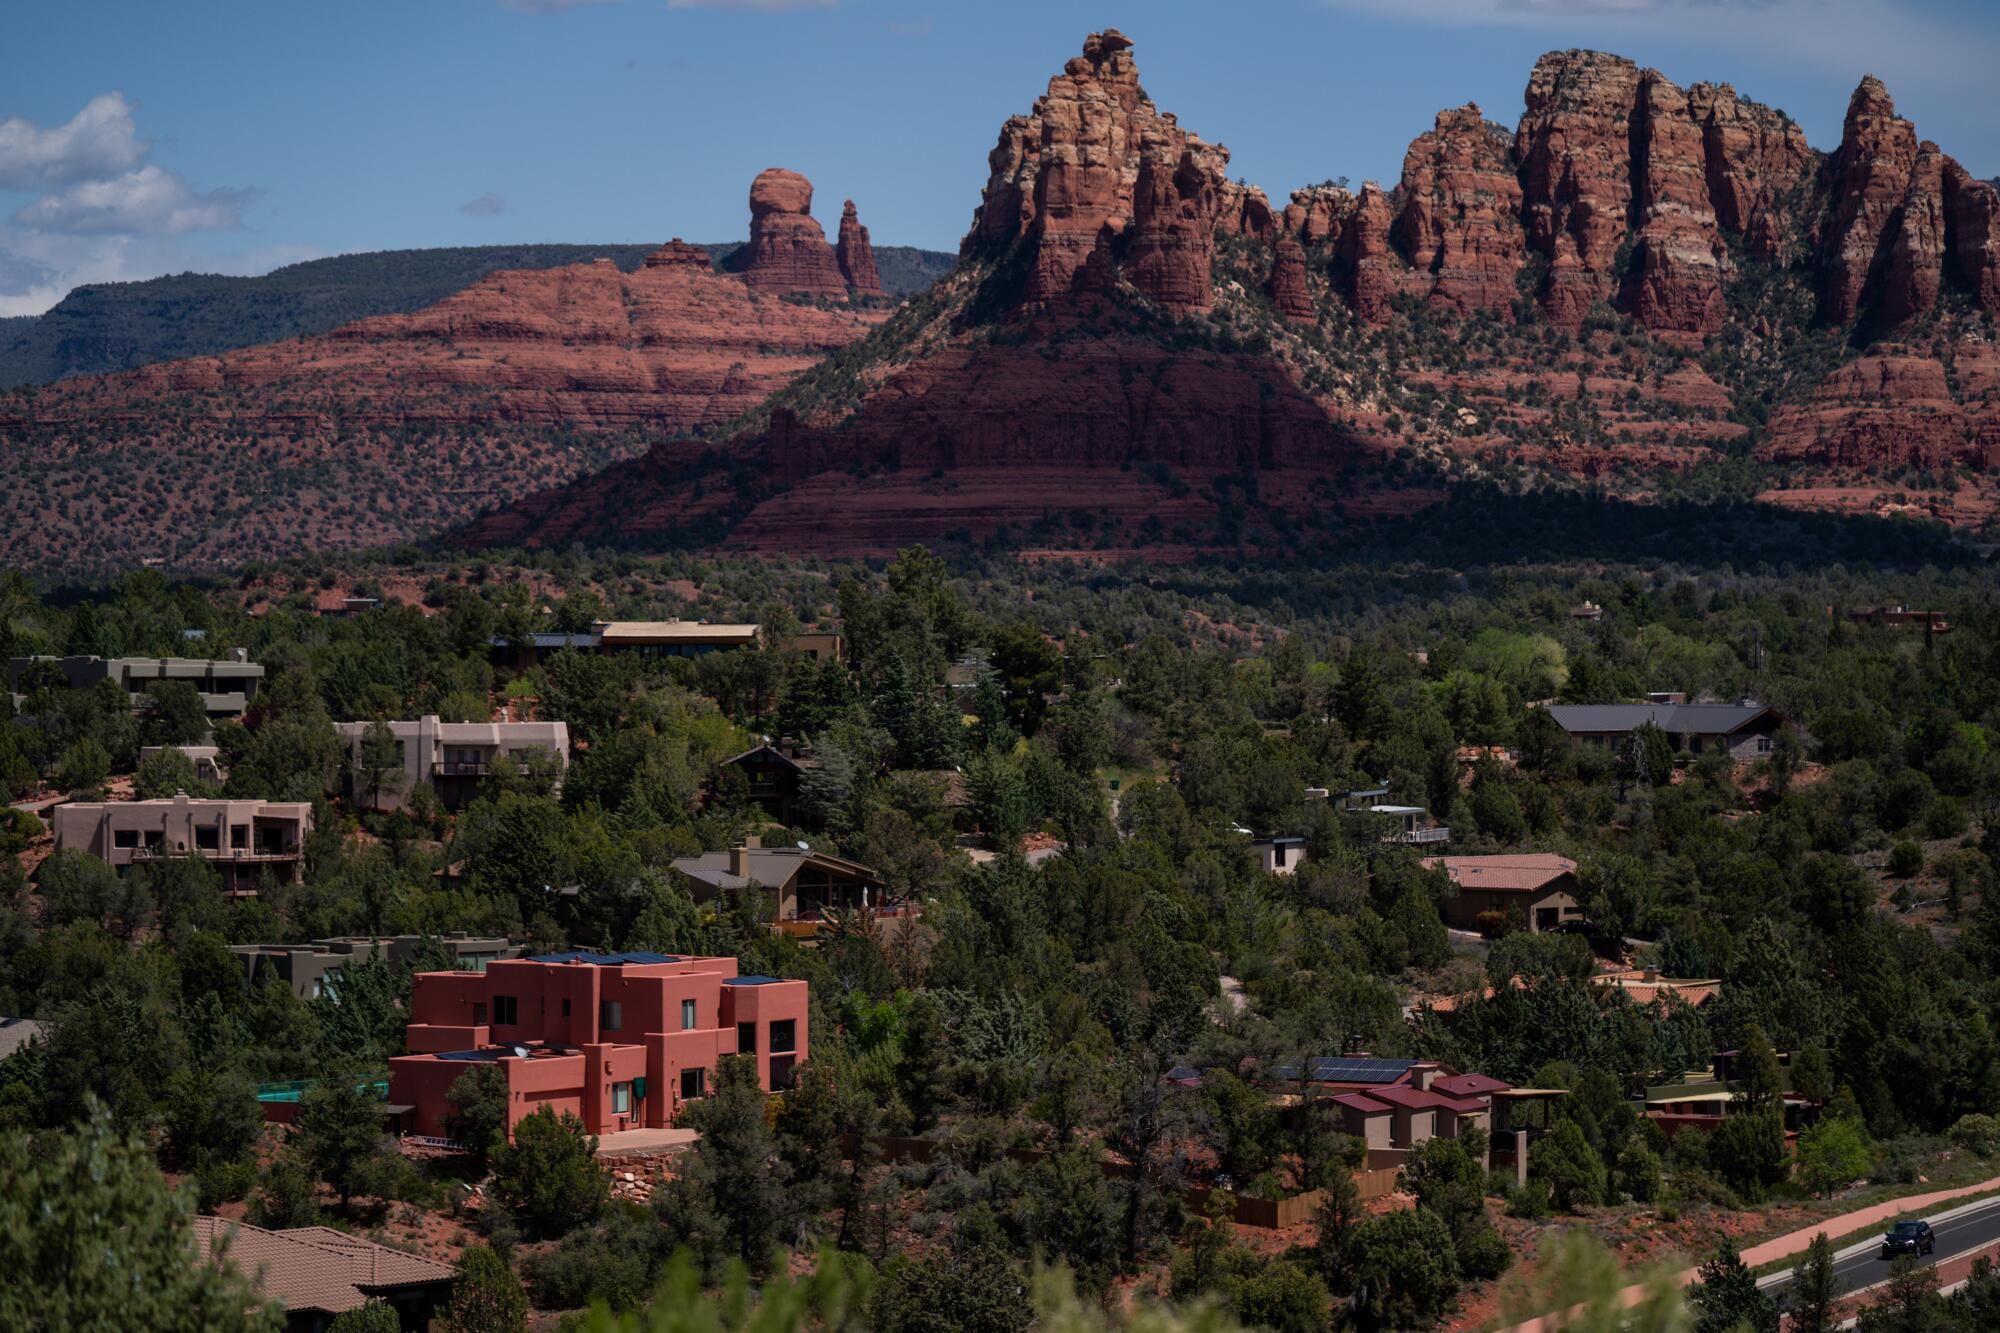 Sedona, nestled in the northern Verde Valley region of Arizona, is a tourism mecca.